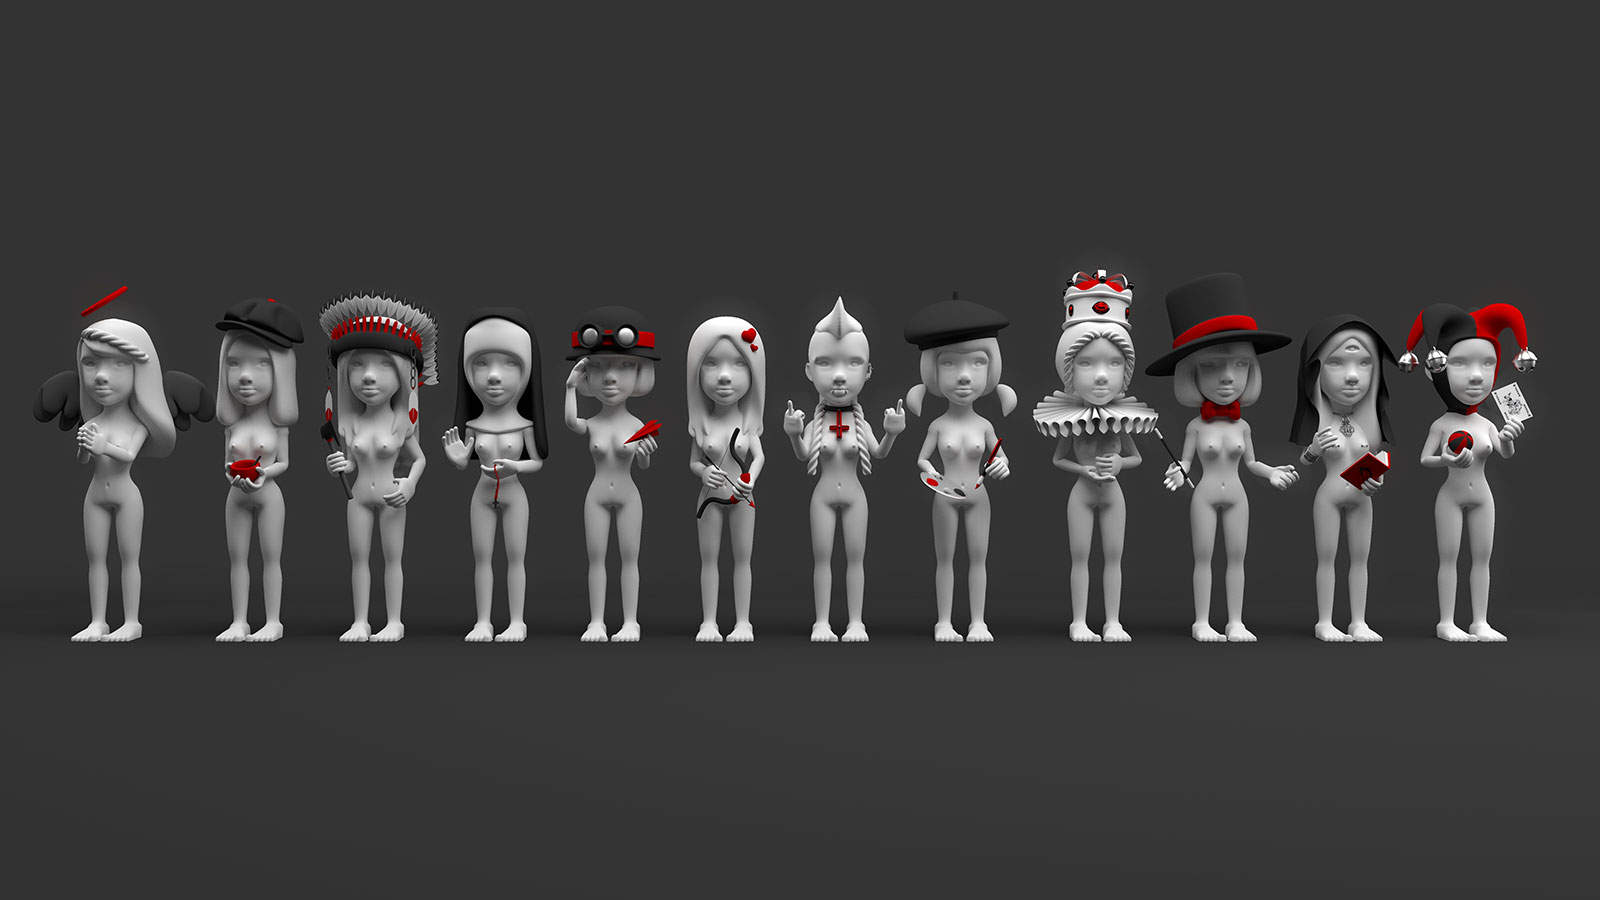 The complete 3D model set of Ava in her 12 archetype forms